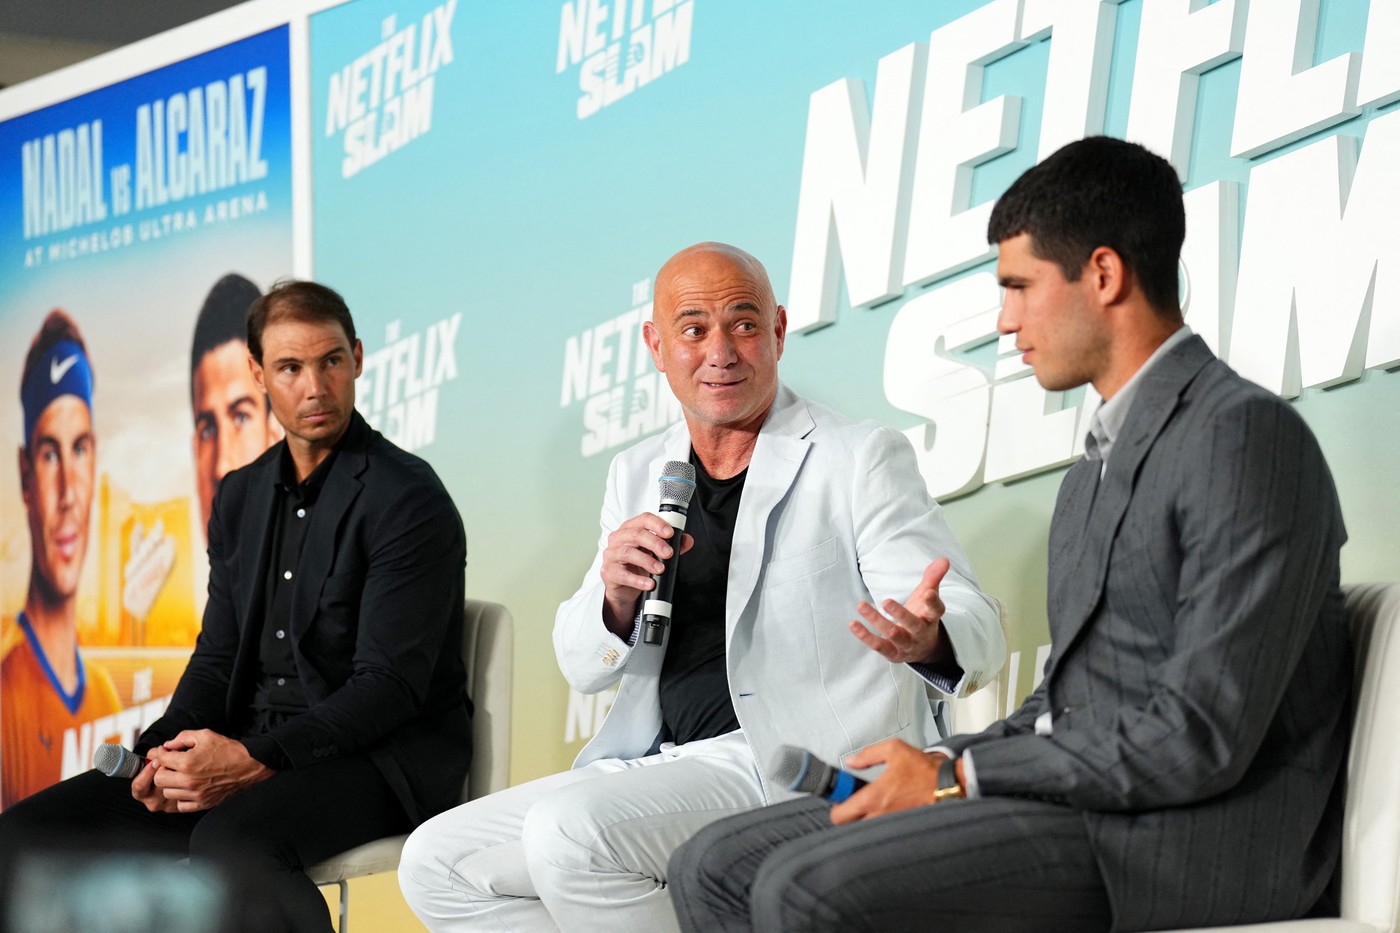 LAS VEGAS, NEVADA - MARCH 02: (L-R) Rafael Nadal, Andre Agassi and Carlos Alcaraz speak onstage during The Netflix Slam media availability event at Mandalay Bay Resort and Casino on March 02, 2024 in Las Vegas, Nevada.   Chris Unger,Image: 853141113, License: Rights-managed, Restrictions: , Model Release: no